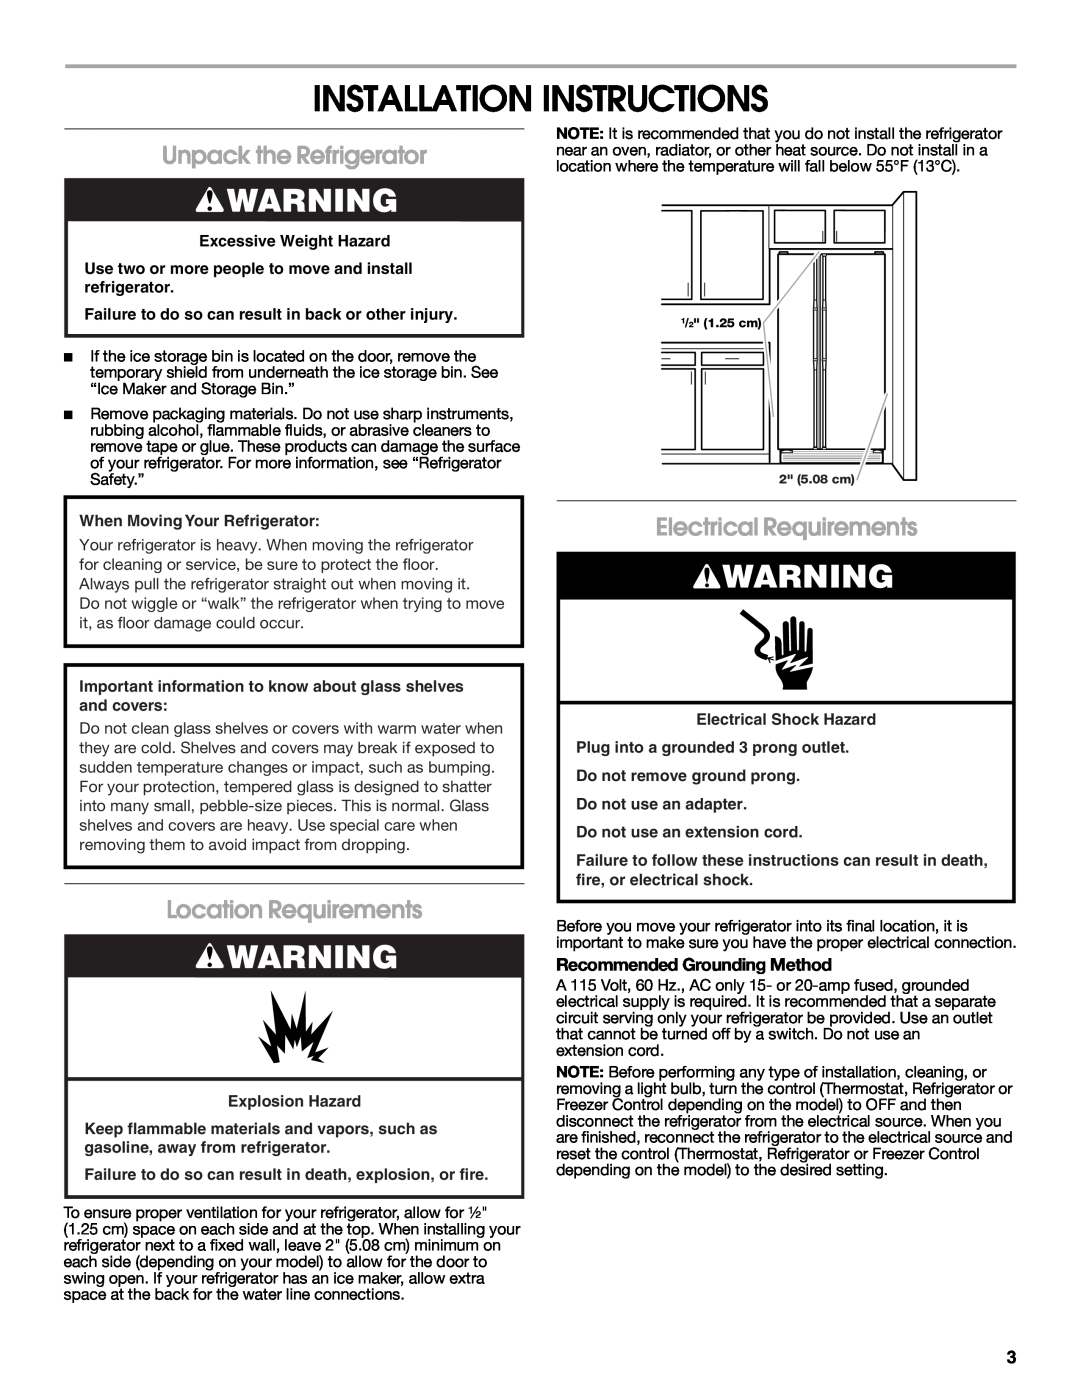 Estate 2318600 warranty Installation Instructions, Unpack the Refrigerator, Location Requirements, Electrical Requirements 